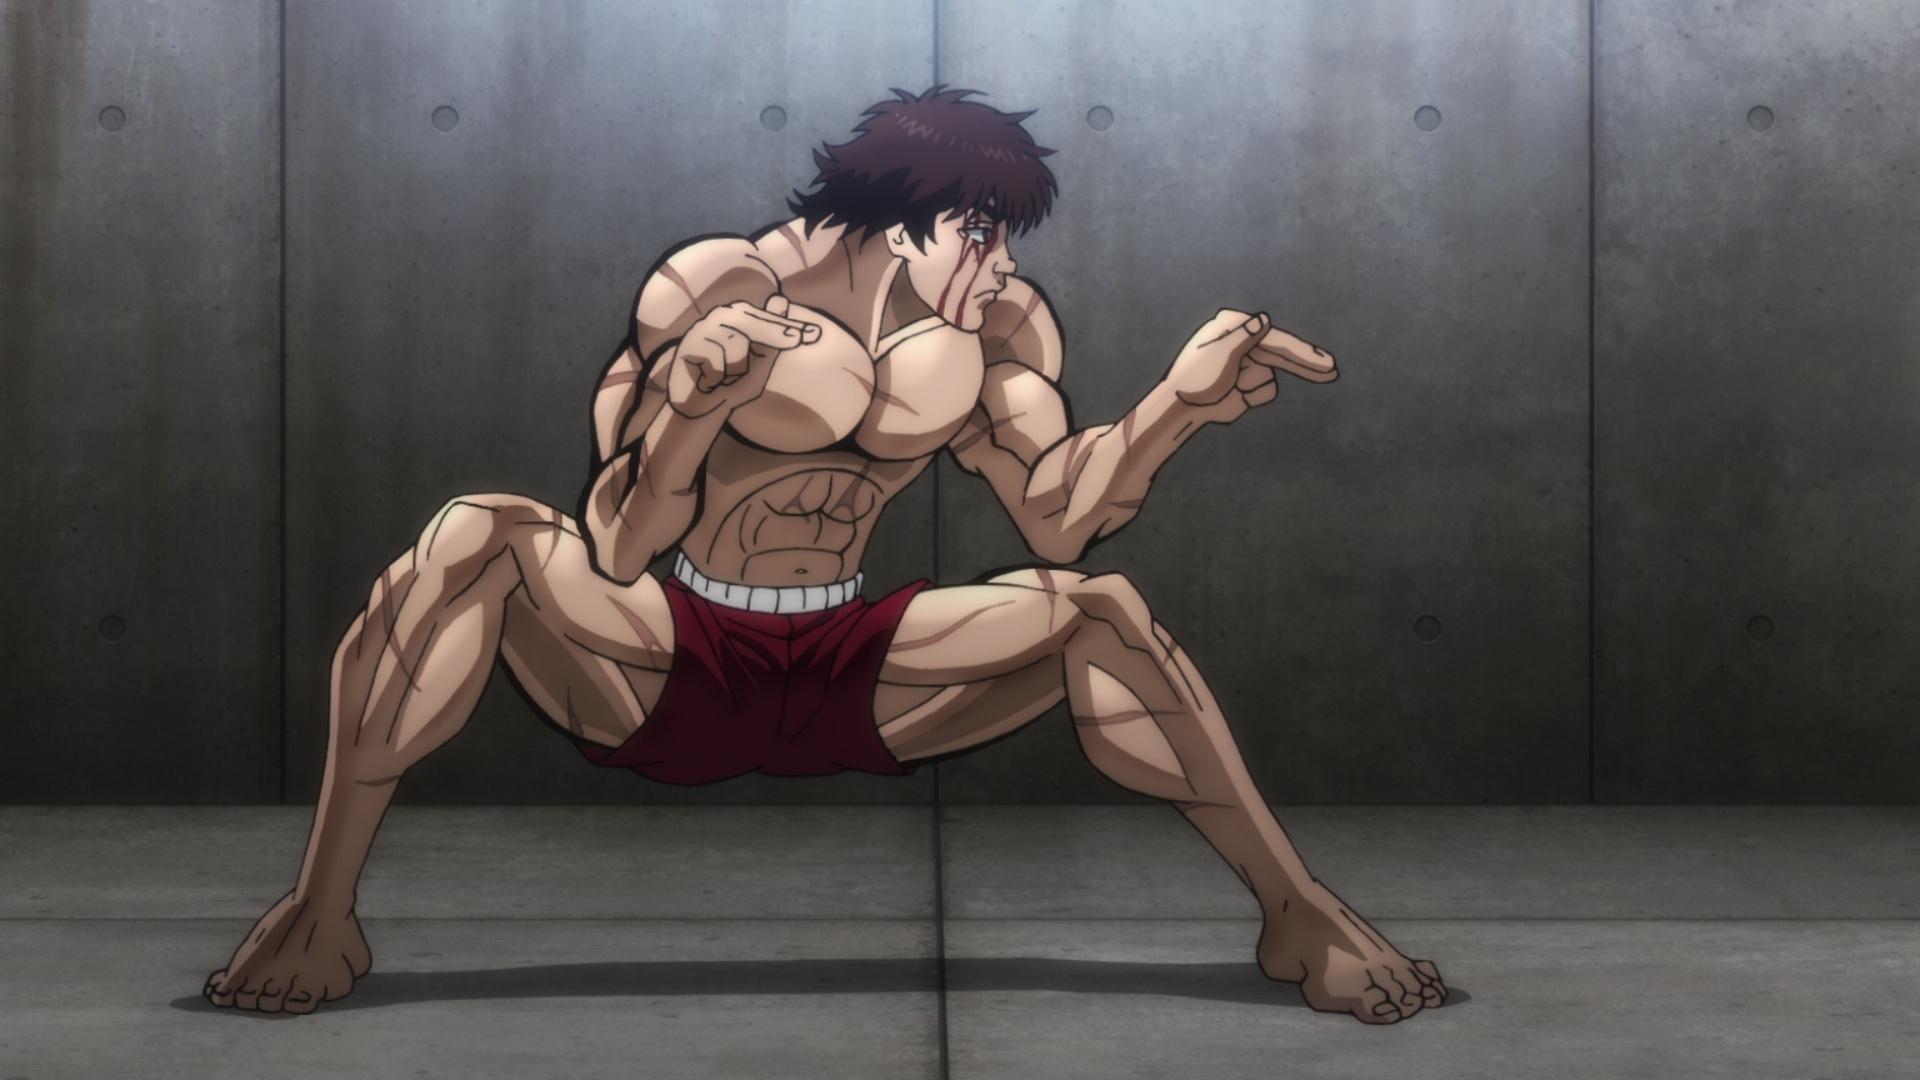 Top 5 characters from the anime 'Baki Hanma